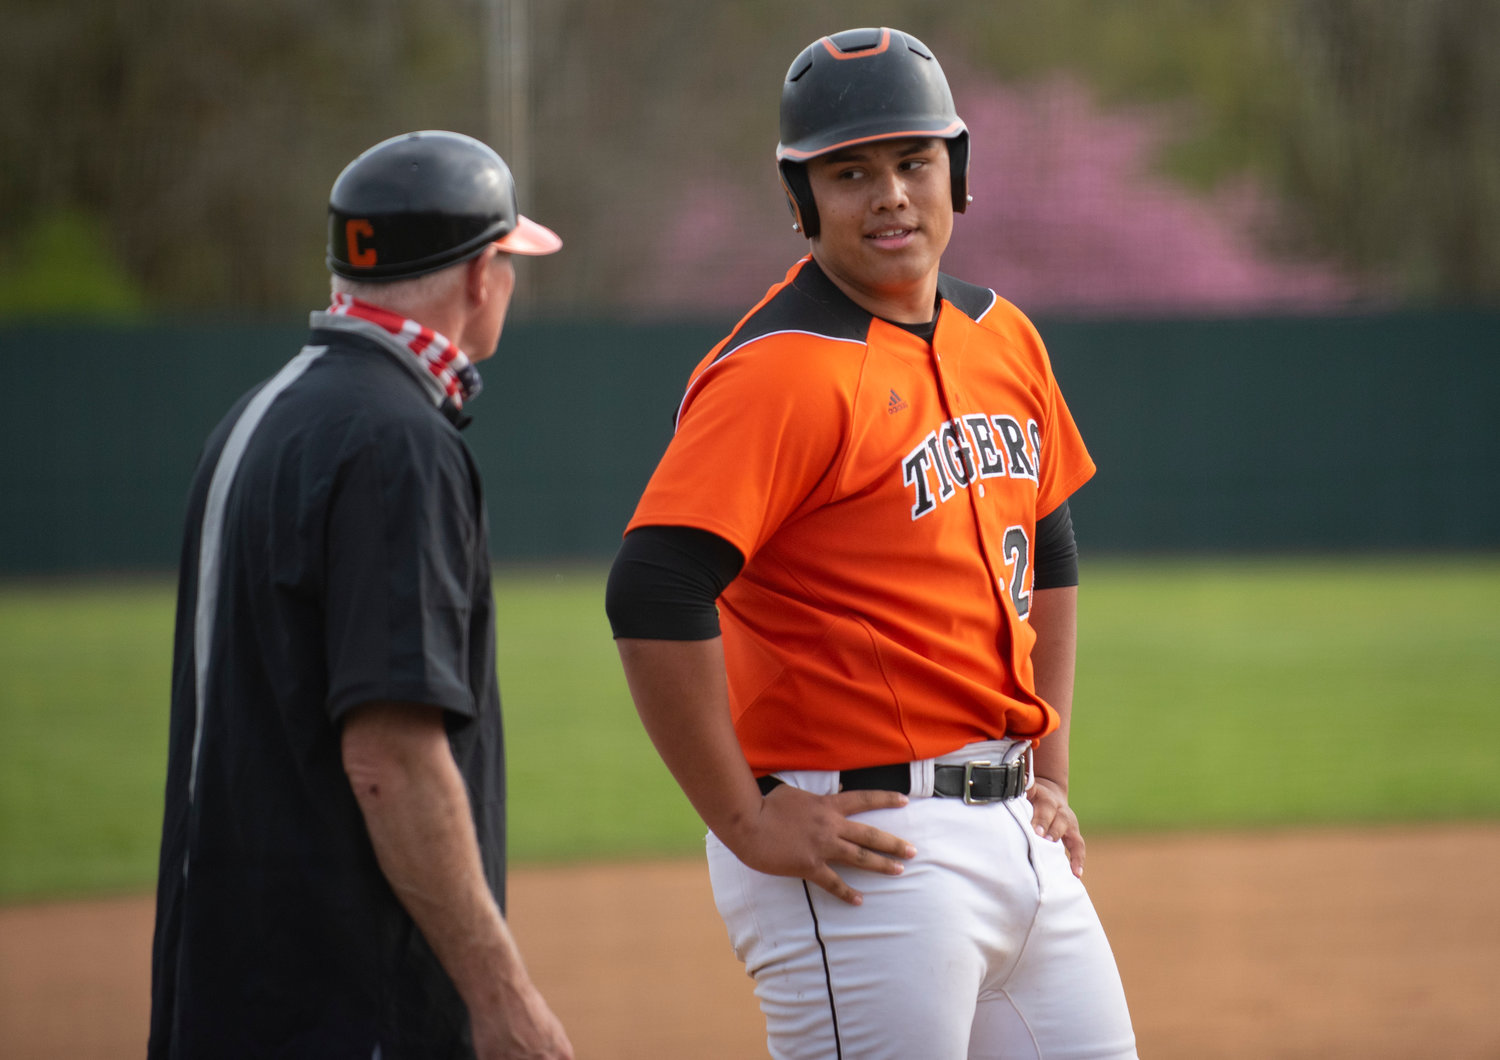 Centralia senior Benito Valencia talks to an asisstant coach after swiping third base against Shelton on Monday.